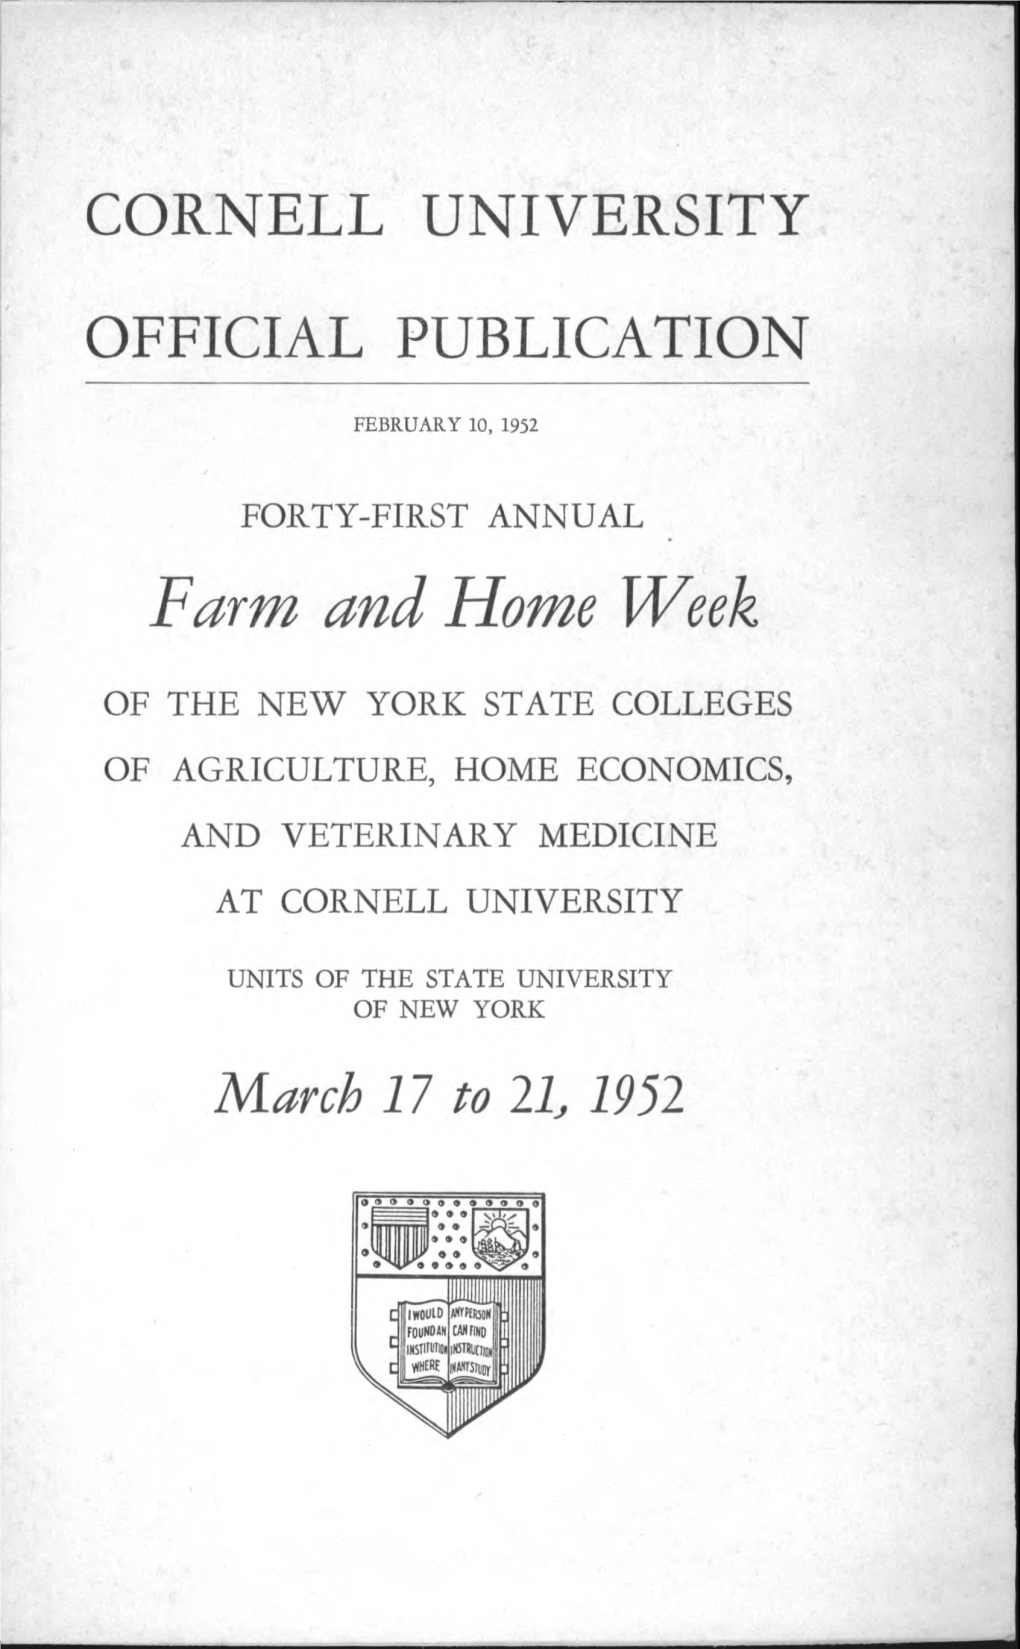 CORNELL UNIVERSITY OFFICIAL PUBLICATION Farm and Home Week